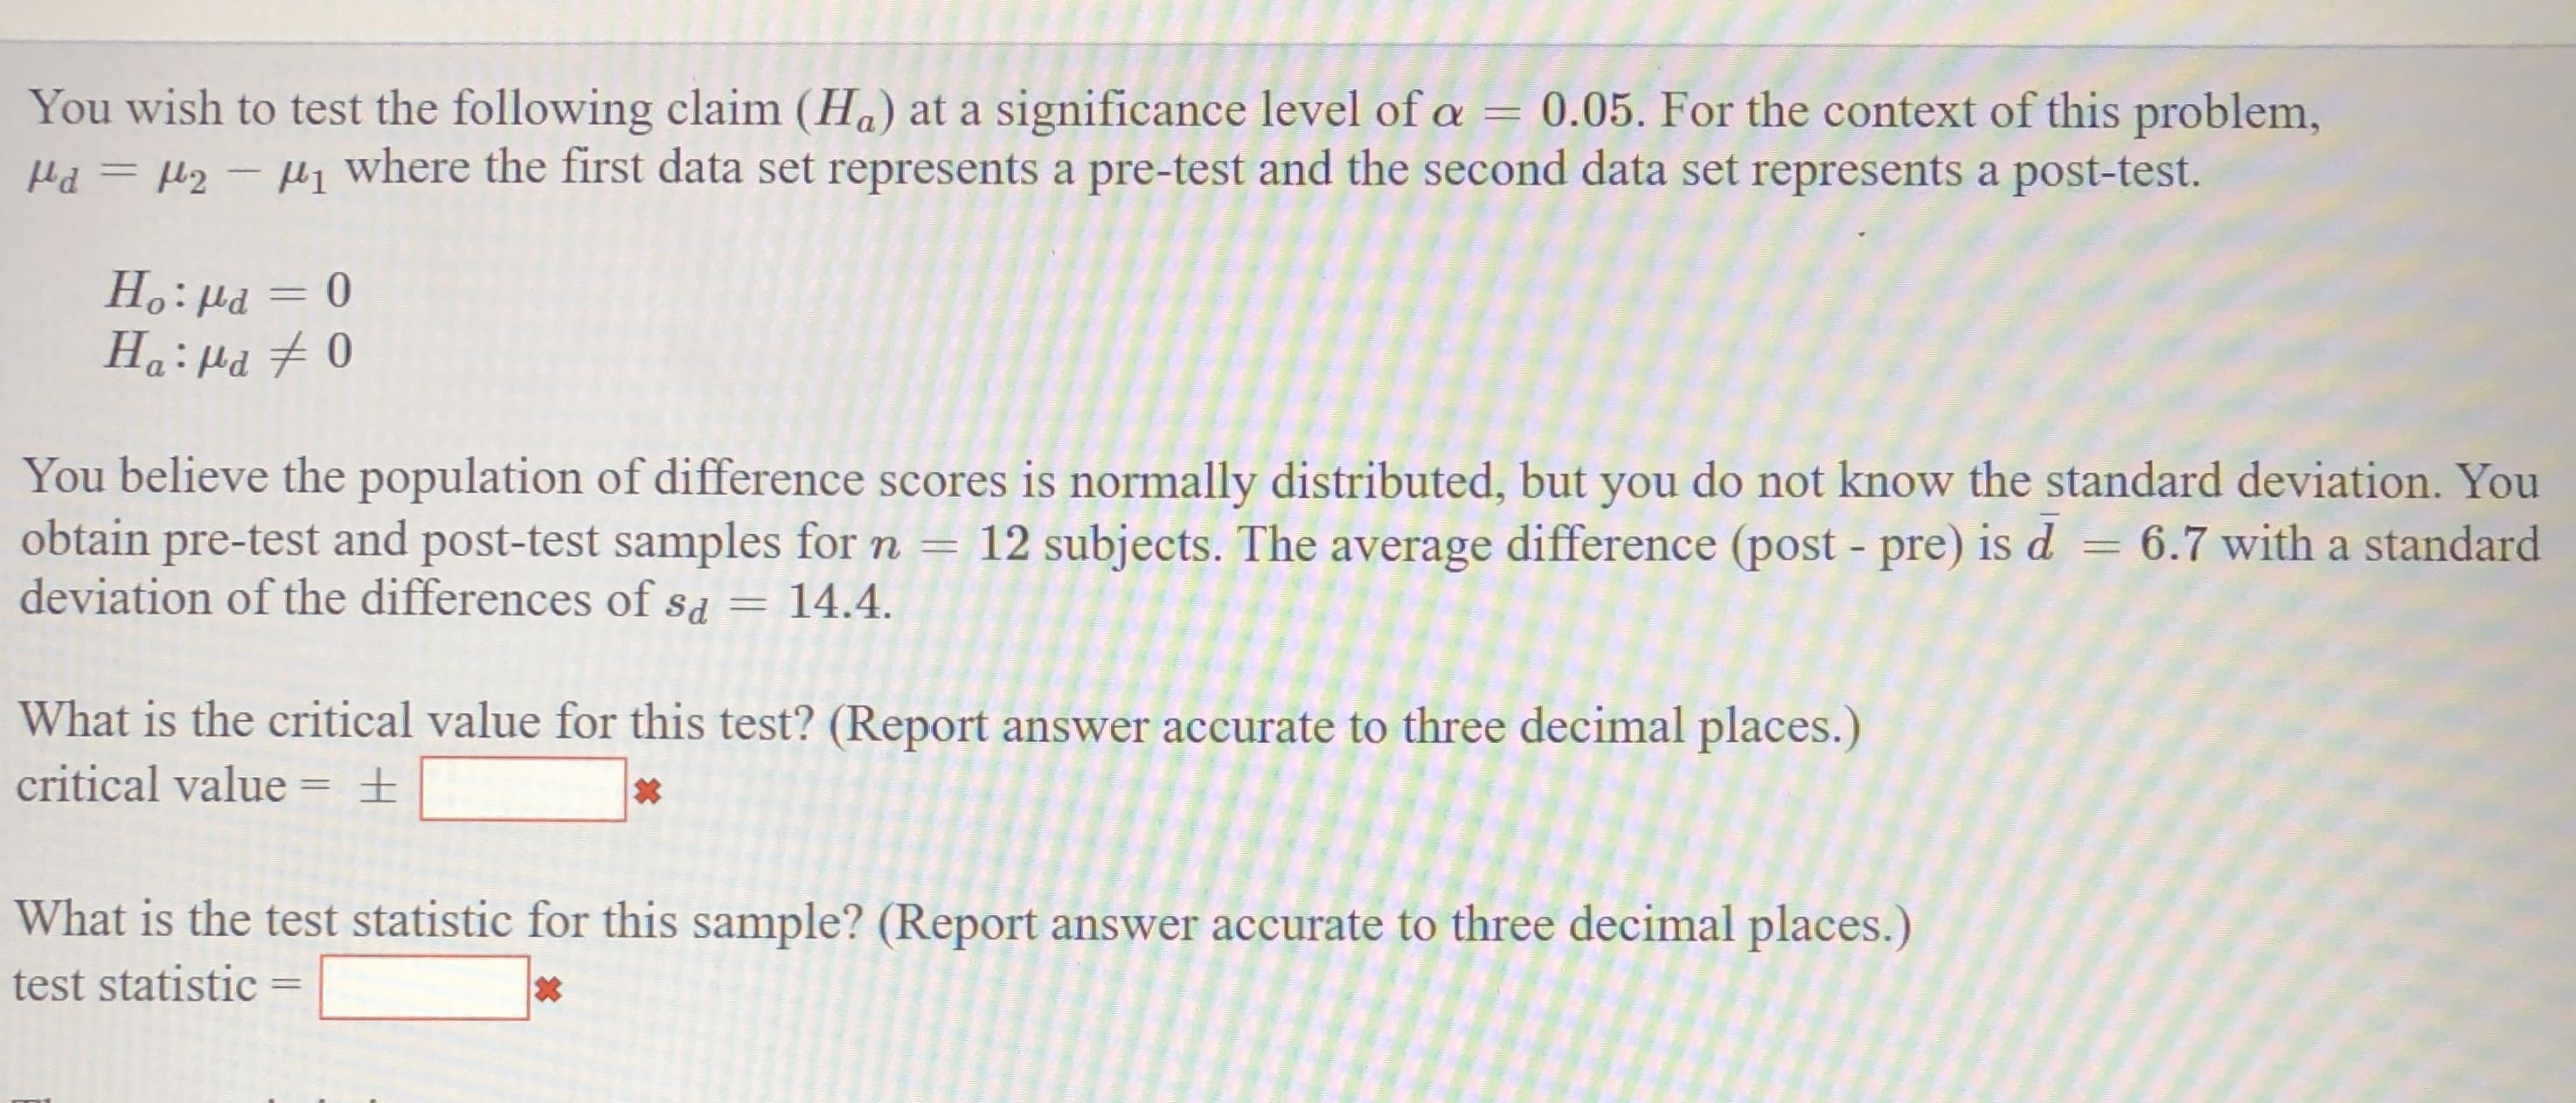 You wish to test the following claim (Ha) at a significance level of a
Hd = H2 - H1 where the first data set represents a pre-test and the second data set represents a post-test.
0.05. For the context of this problem,
%3D
Prl :°H
Ha:Hd 70
µa = 0
You believe the population of difference scores is normally distributed, but you do not know the standard deviation. You
obtain pre-test and post-test samples for n
deviation of the differences of sd = 14.4.
12 subjects. The average difference (post - pre) is d
= 6.7 with a standard
What is the critical value for this test? (Report answer accurate to three decimal places.)
critical value = ±
What is the test statistic for this sample? (Report answer accurate to three decimal places.)
test statistic
